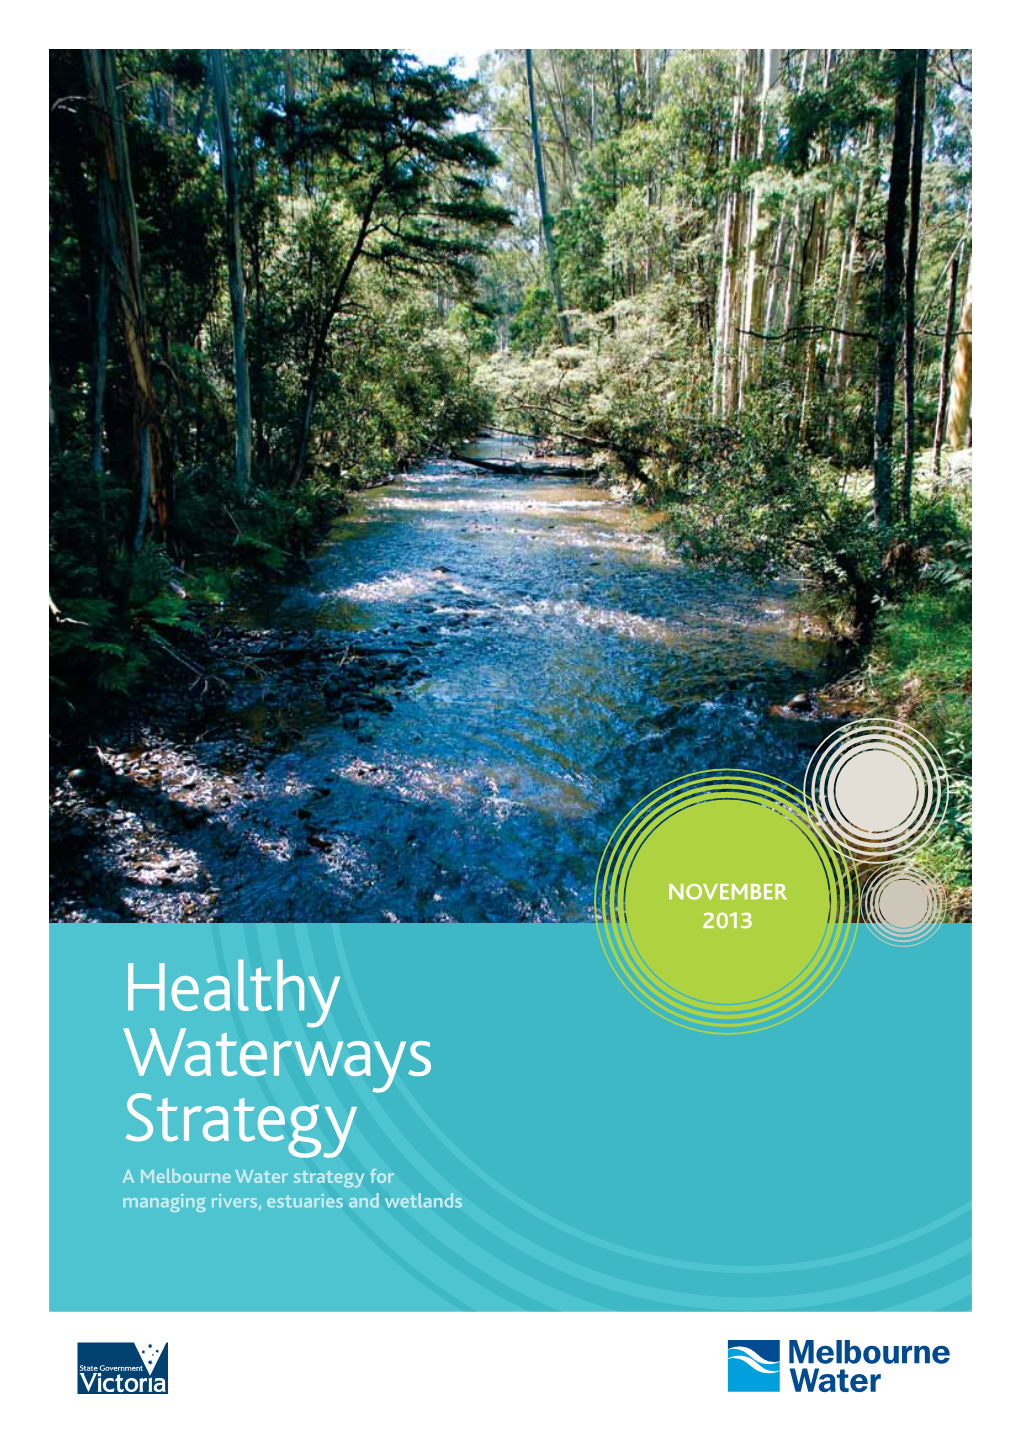 Healthy Waterways Strategy a Melbourne Water Strategy for Managing Rivers, Estuaries and Wetlands